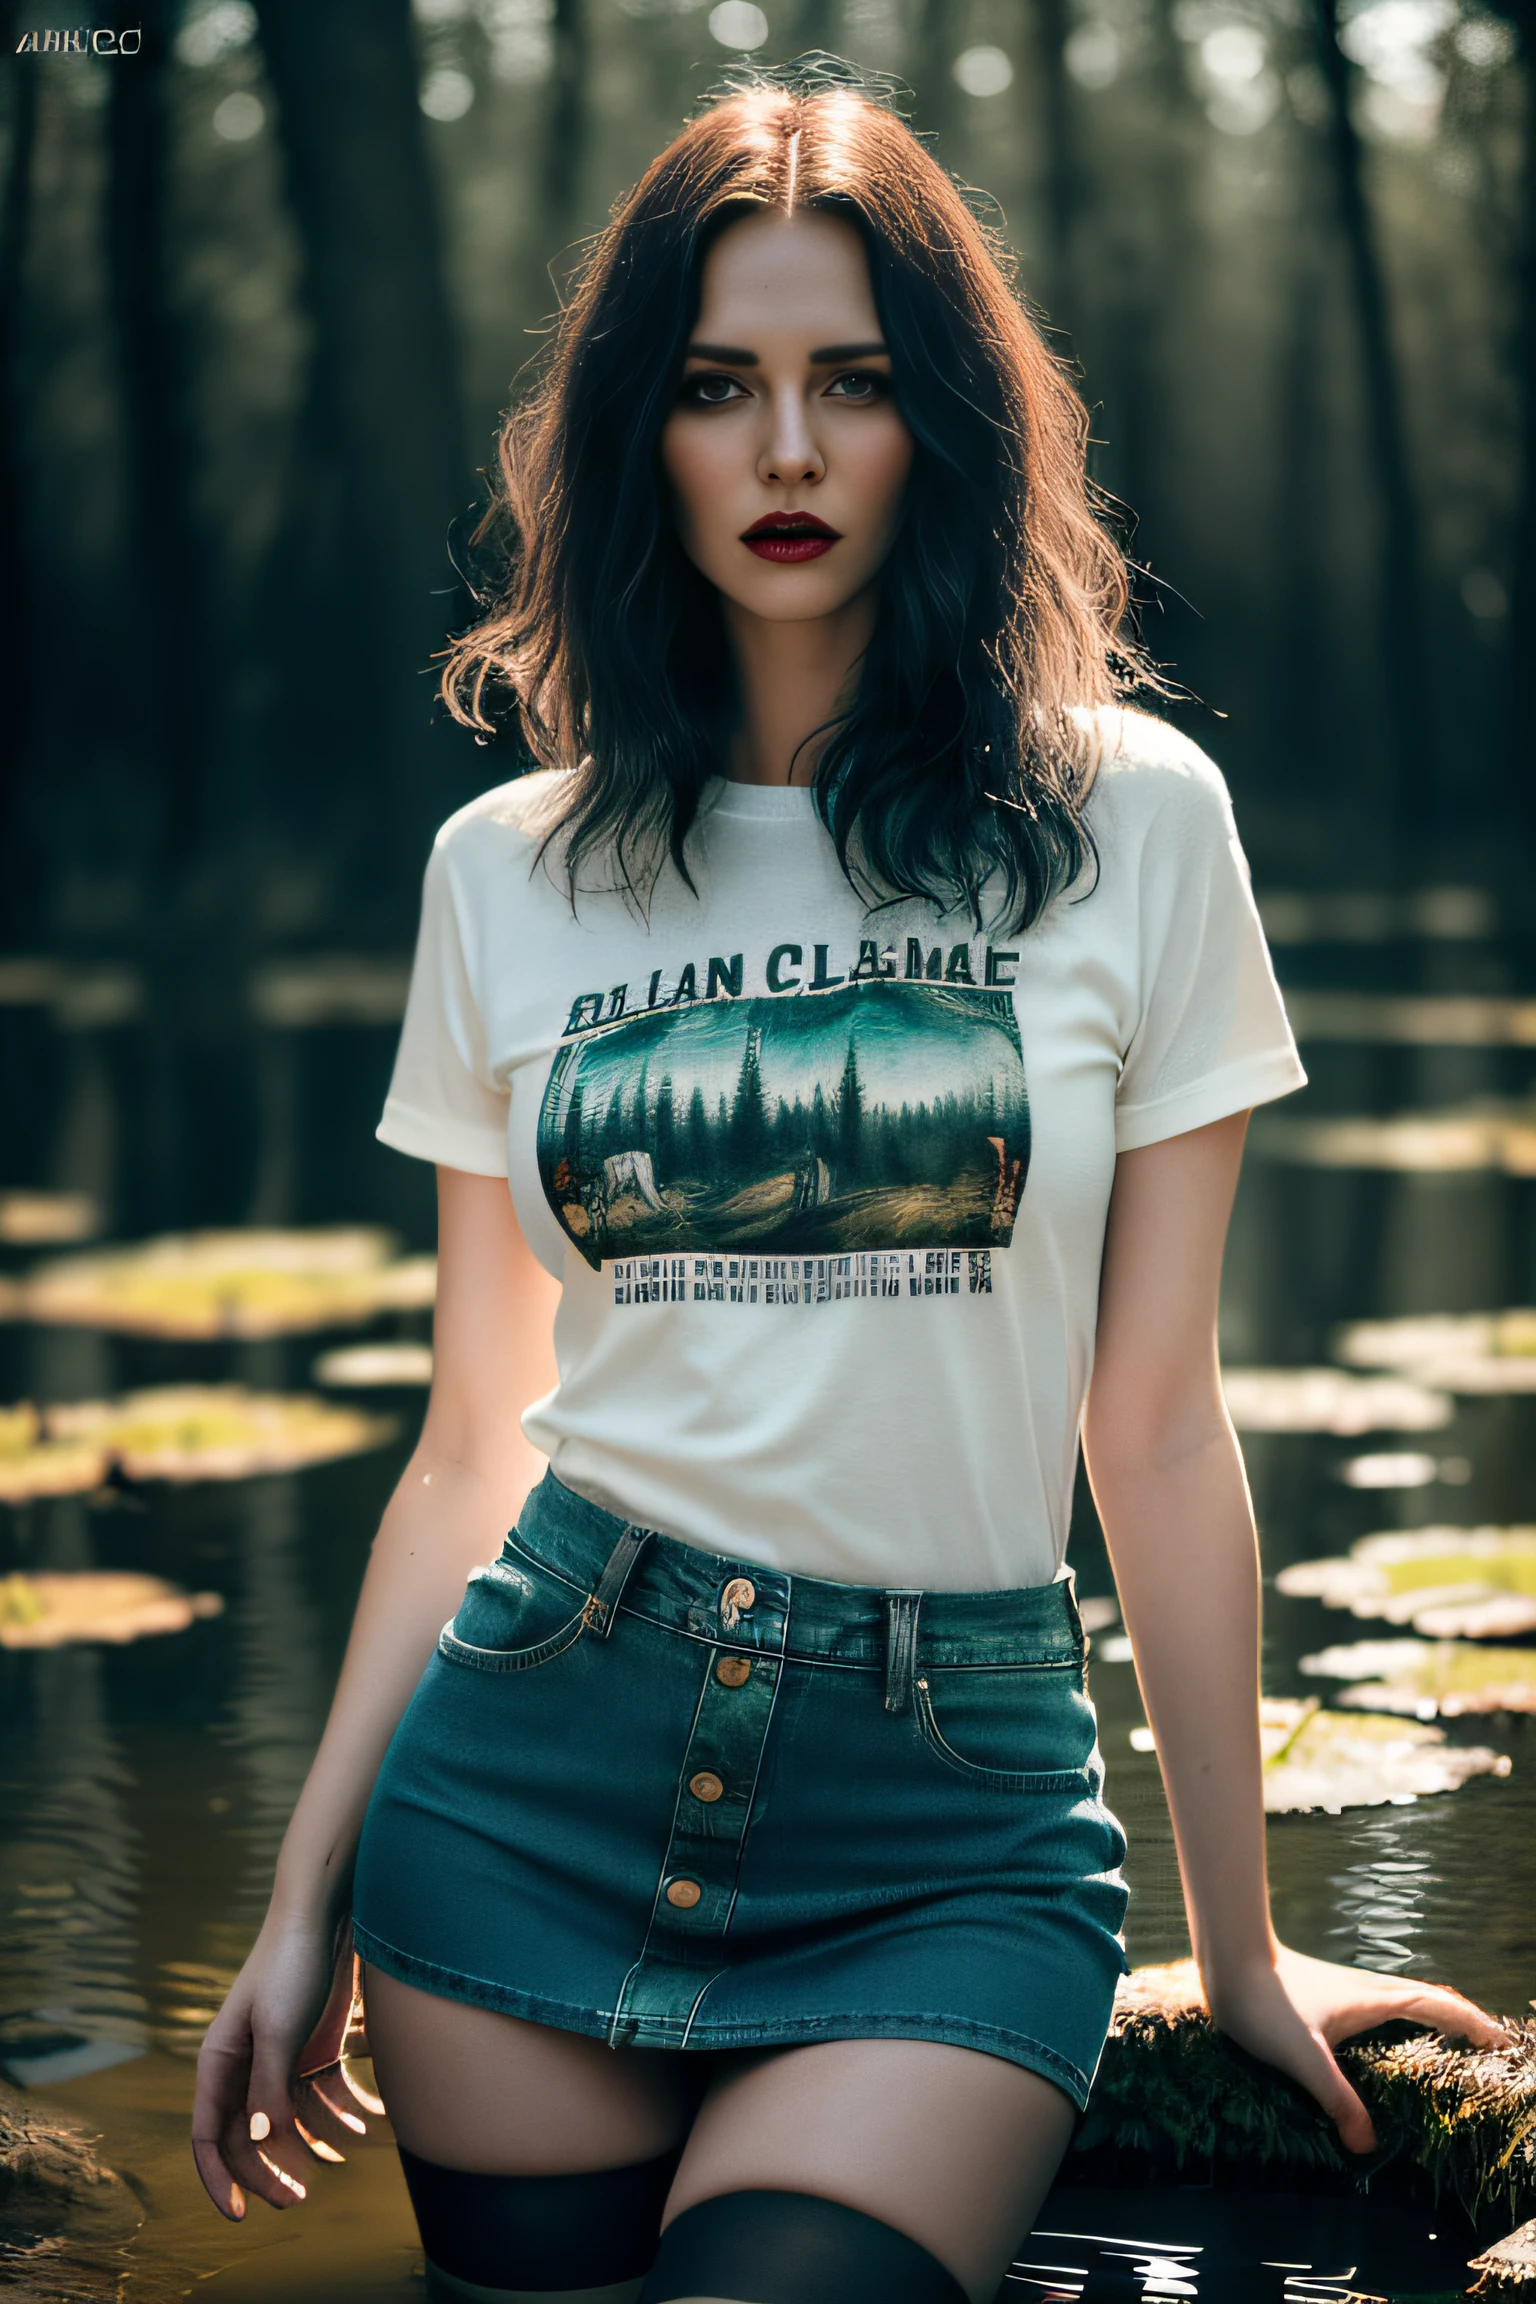 drowning in a bog, (Best Quality,4k,8K,hight resolution,Masterpiece:1.2),Ultra-detailed,(Realistic,Photorealistic,photo-realistic:1.37),Woman in denim skirt,T-shirt and stockings with garters, reveling in their shame,Vivid colors,perfect  lighting,High contrast,blurred background,An Unapologetic Expression,haute couture,Forest setting,Confident posture,golden hour lighting,Rustic charm,Acute vibes,provocative,A sense of modern fashion, decadence,Bold style,Urban chic,striking composition,Long-lasting aesthetics,Details,,Bold Makeup,Grunge Fashion,Нахальное attitude,Raw emotions,Alluring beauty,A Bold Fashion Statement,bokeh, drowning in a swamp:1.3